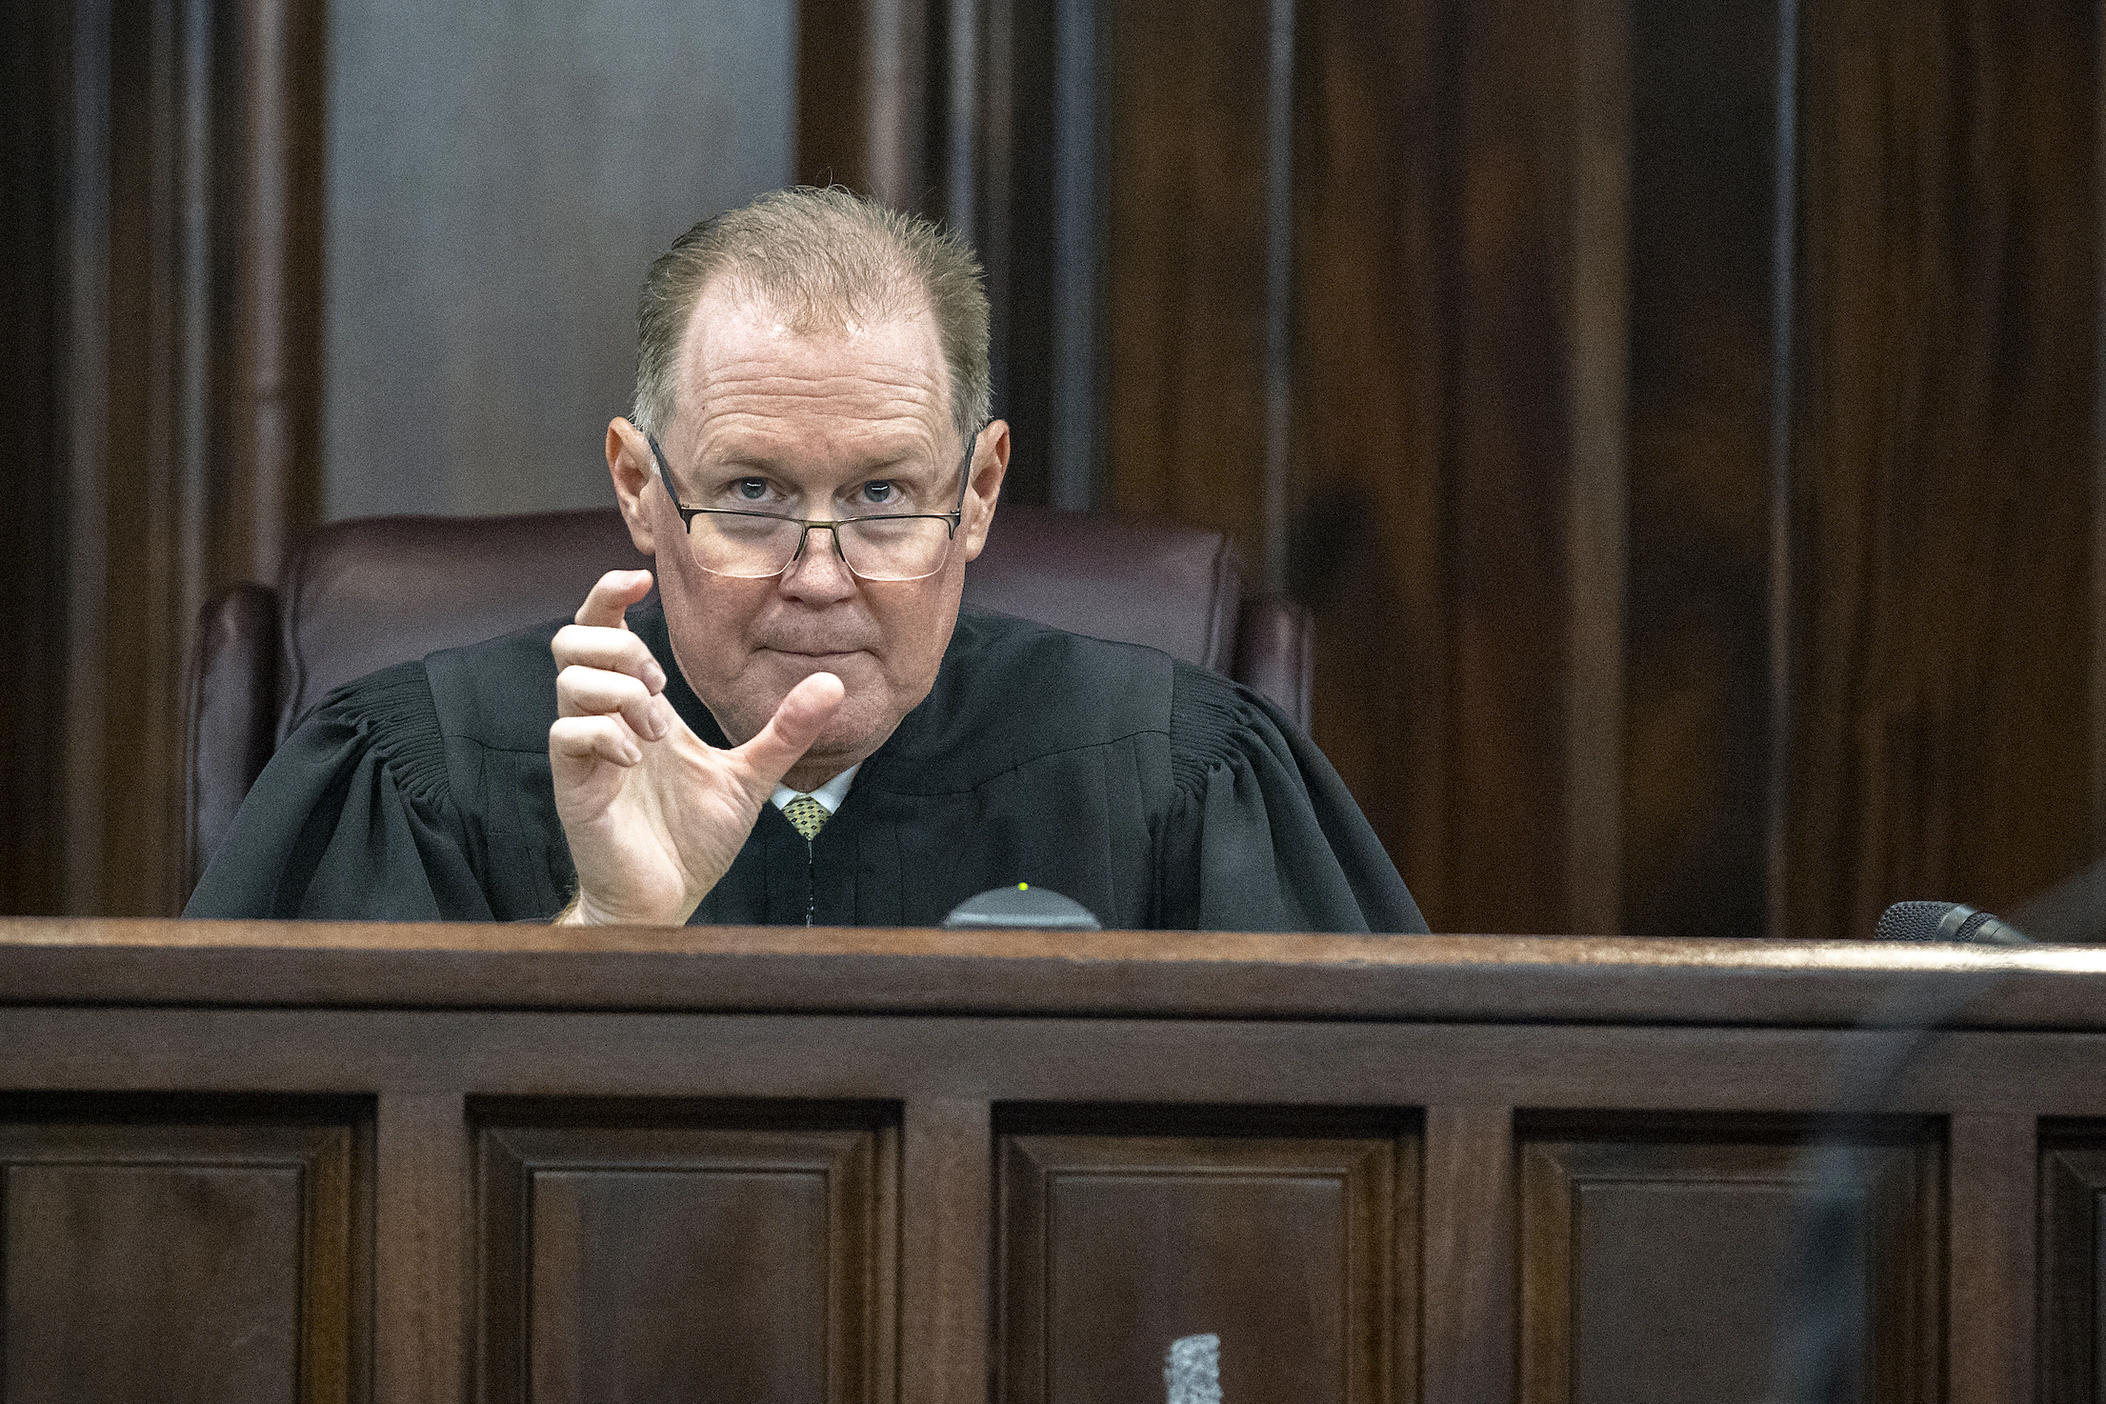 Superior Court Judge Timothy Walmsley clarifies a jury request to view a short video clip as part of their deliberation during the trial of Greg McMichael, his son Travis McMichael, and neighbor, William "Roddie" Bryan, Wednesday, Nov. 24, 2021, in the Glynn County Courthouse in Brunswick, Ga.